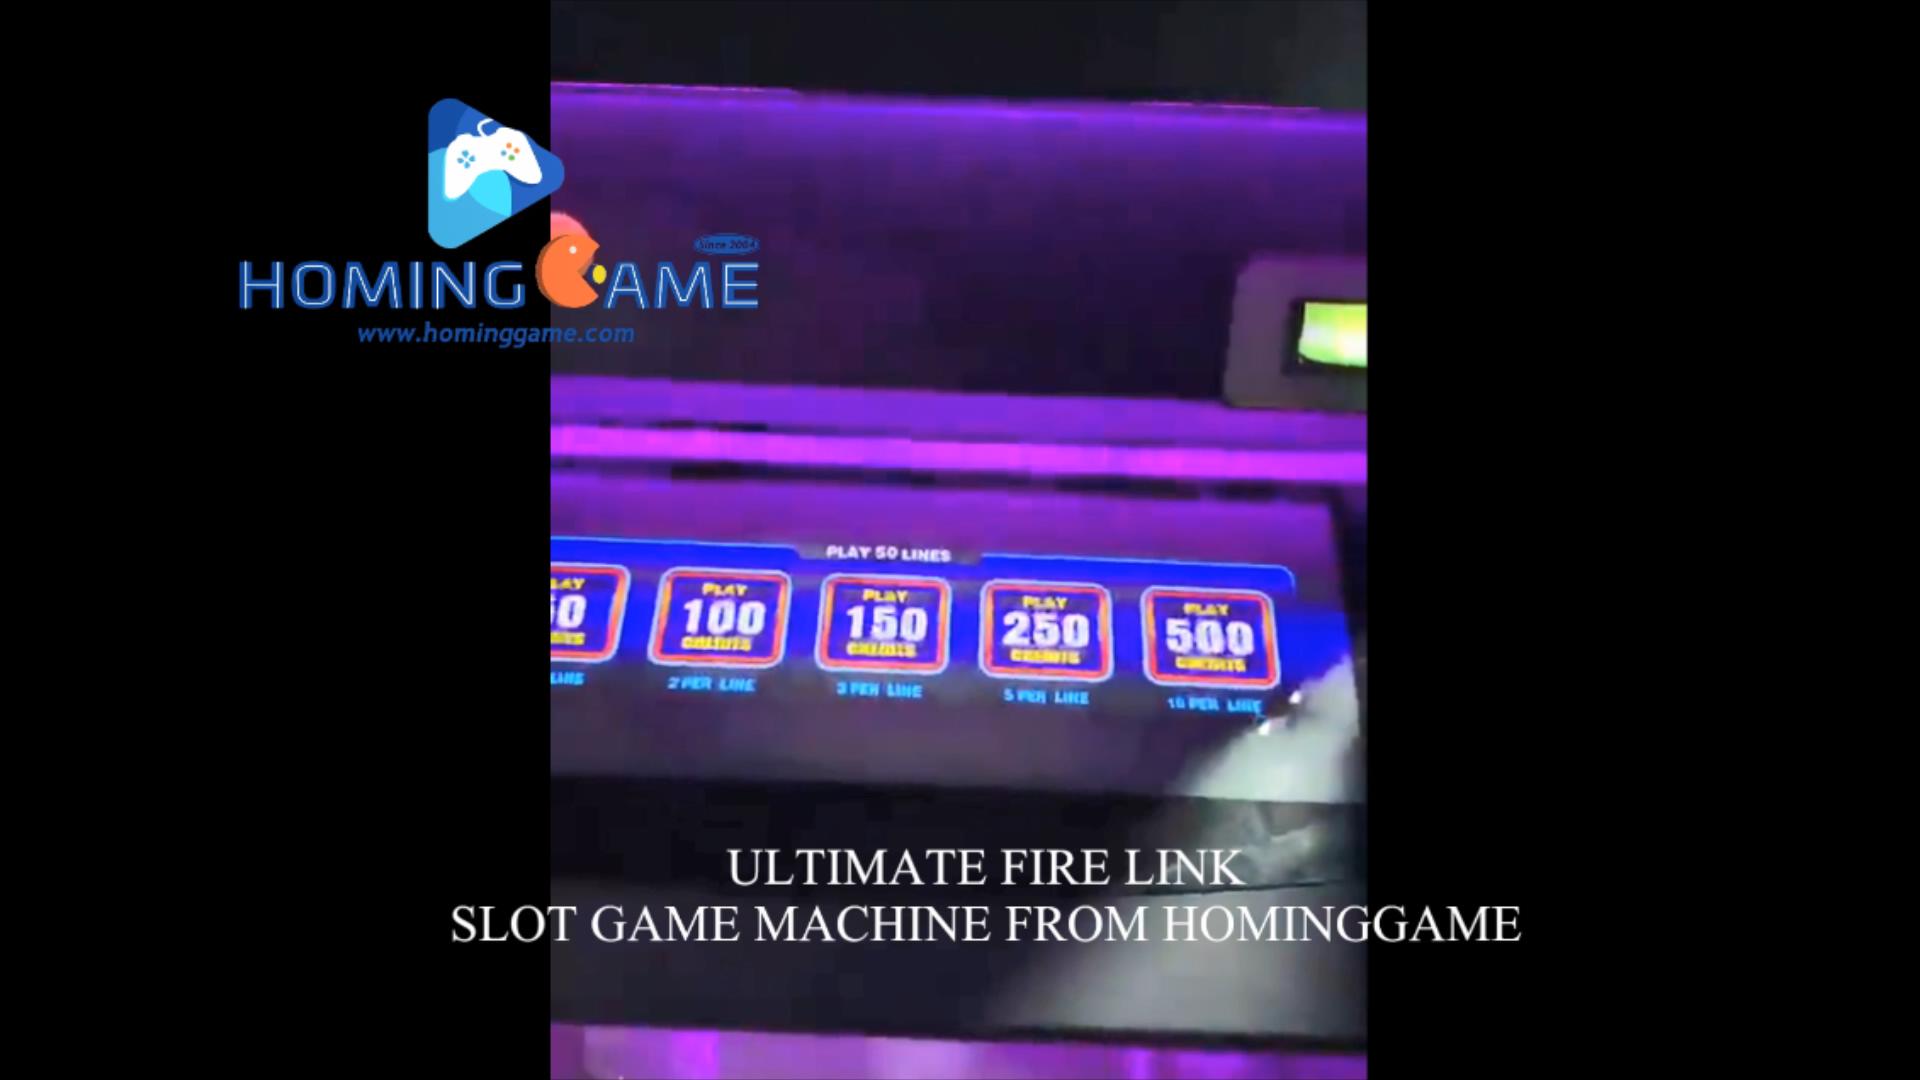 2020 2021 USA TOP HOT Slot Game Ultimate Fire Link Slot Game Machine Produced By HomingGame(Order Call Whatsapp:+8618688409495),ultimate fire link,ultimate fire link slot game machine,ultimate fire link slot game,fire link slot game machine,fire link,ultimate fire link slot gaming machine,ultimate fire link slot table gaming machine,slot game,slot table game,slot gaming machine,game machine,arcade game machine,coin operated game machine,arcade game machine for sale,amsuement machine,entertainment game machine,family entertainment game machine,hominggame,www.gametube.hk,indoor game machine,casino,gambling machine,electrical game machine,slot,slot game machine for sale,slot table for sale,simulator game machine,video game machine,video game,video game machine for sale,hominggame fire link slot game,slot gaming